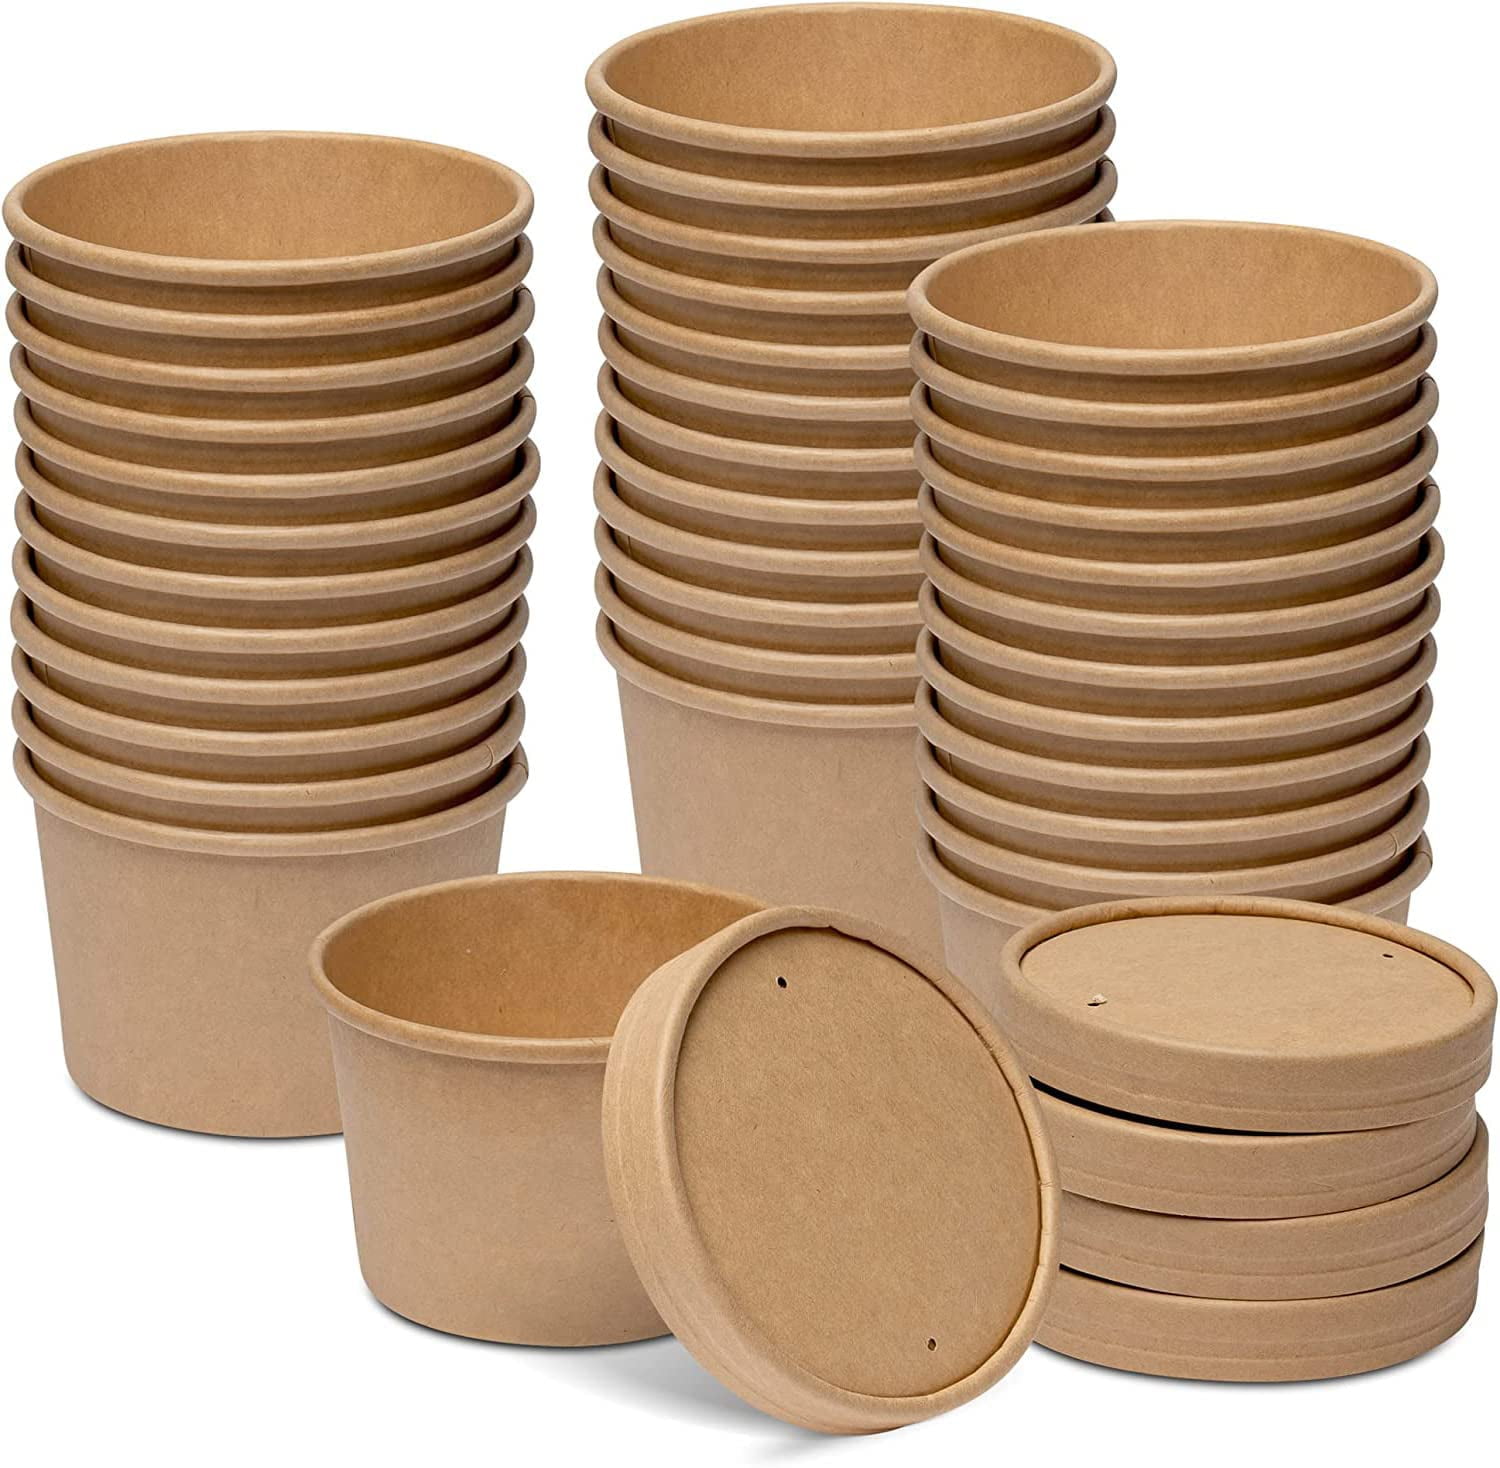 Cardboard 26oz Soup Containers  26oz Insulated Takeout Hot